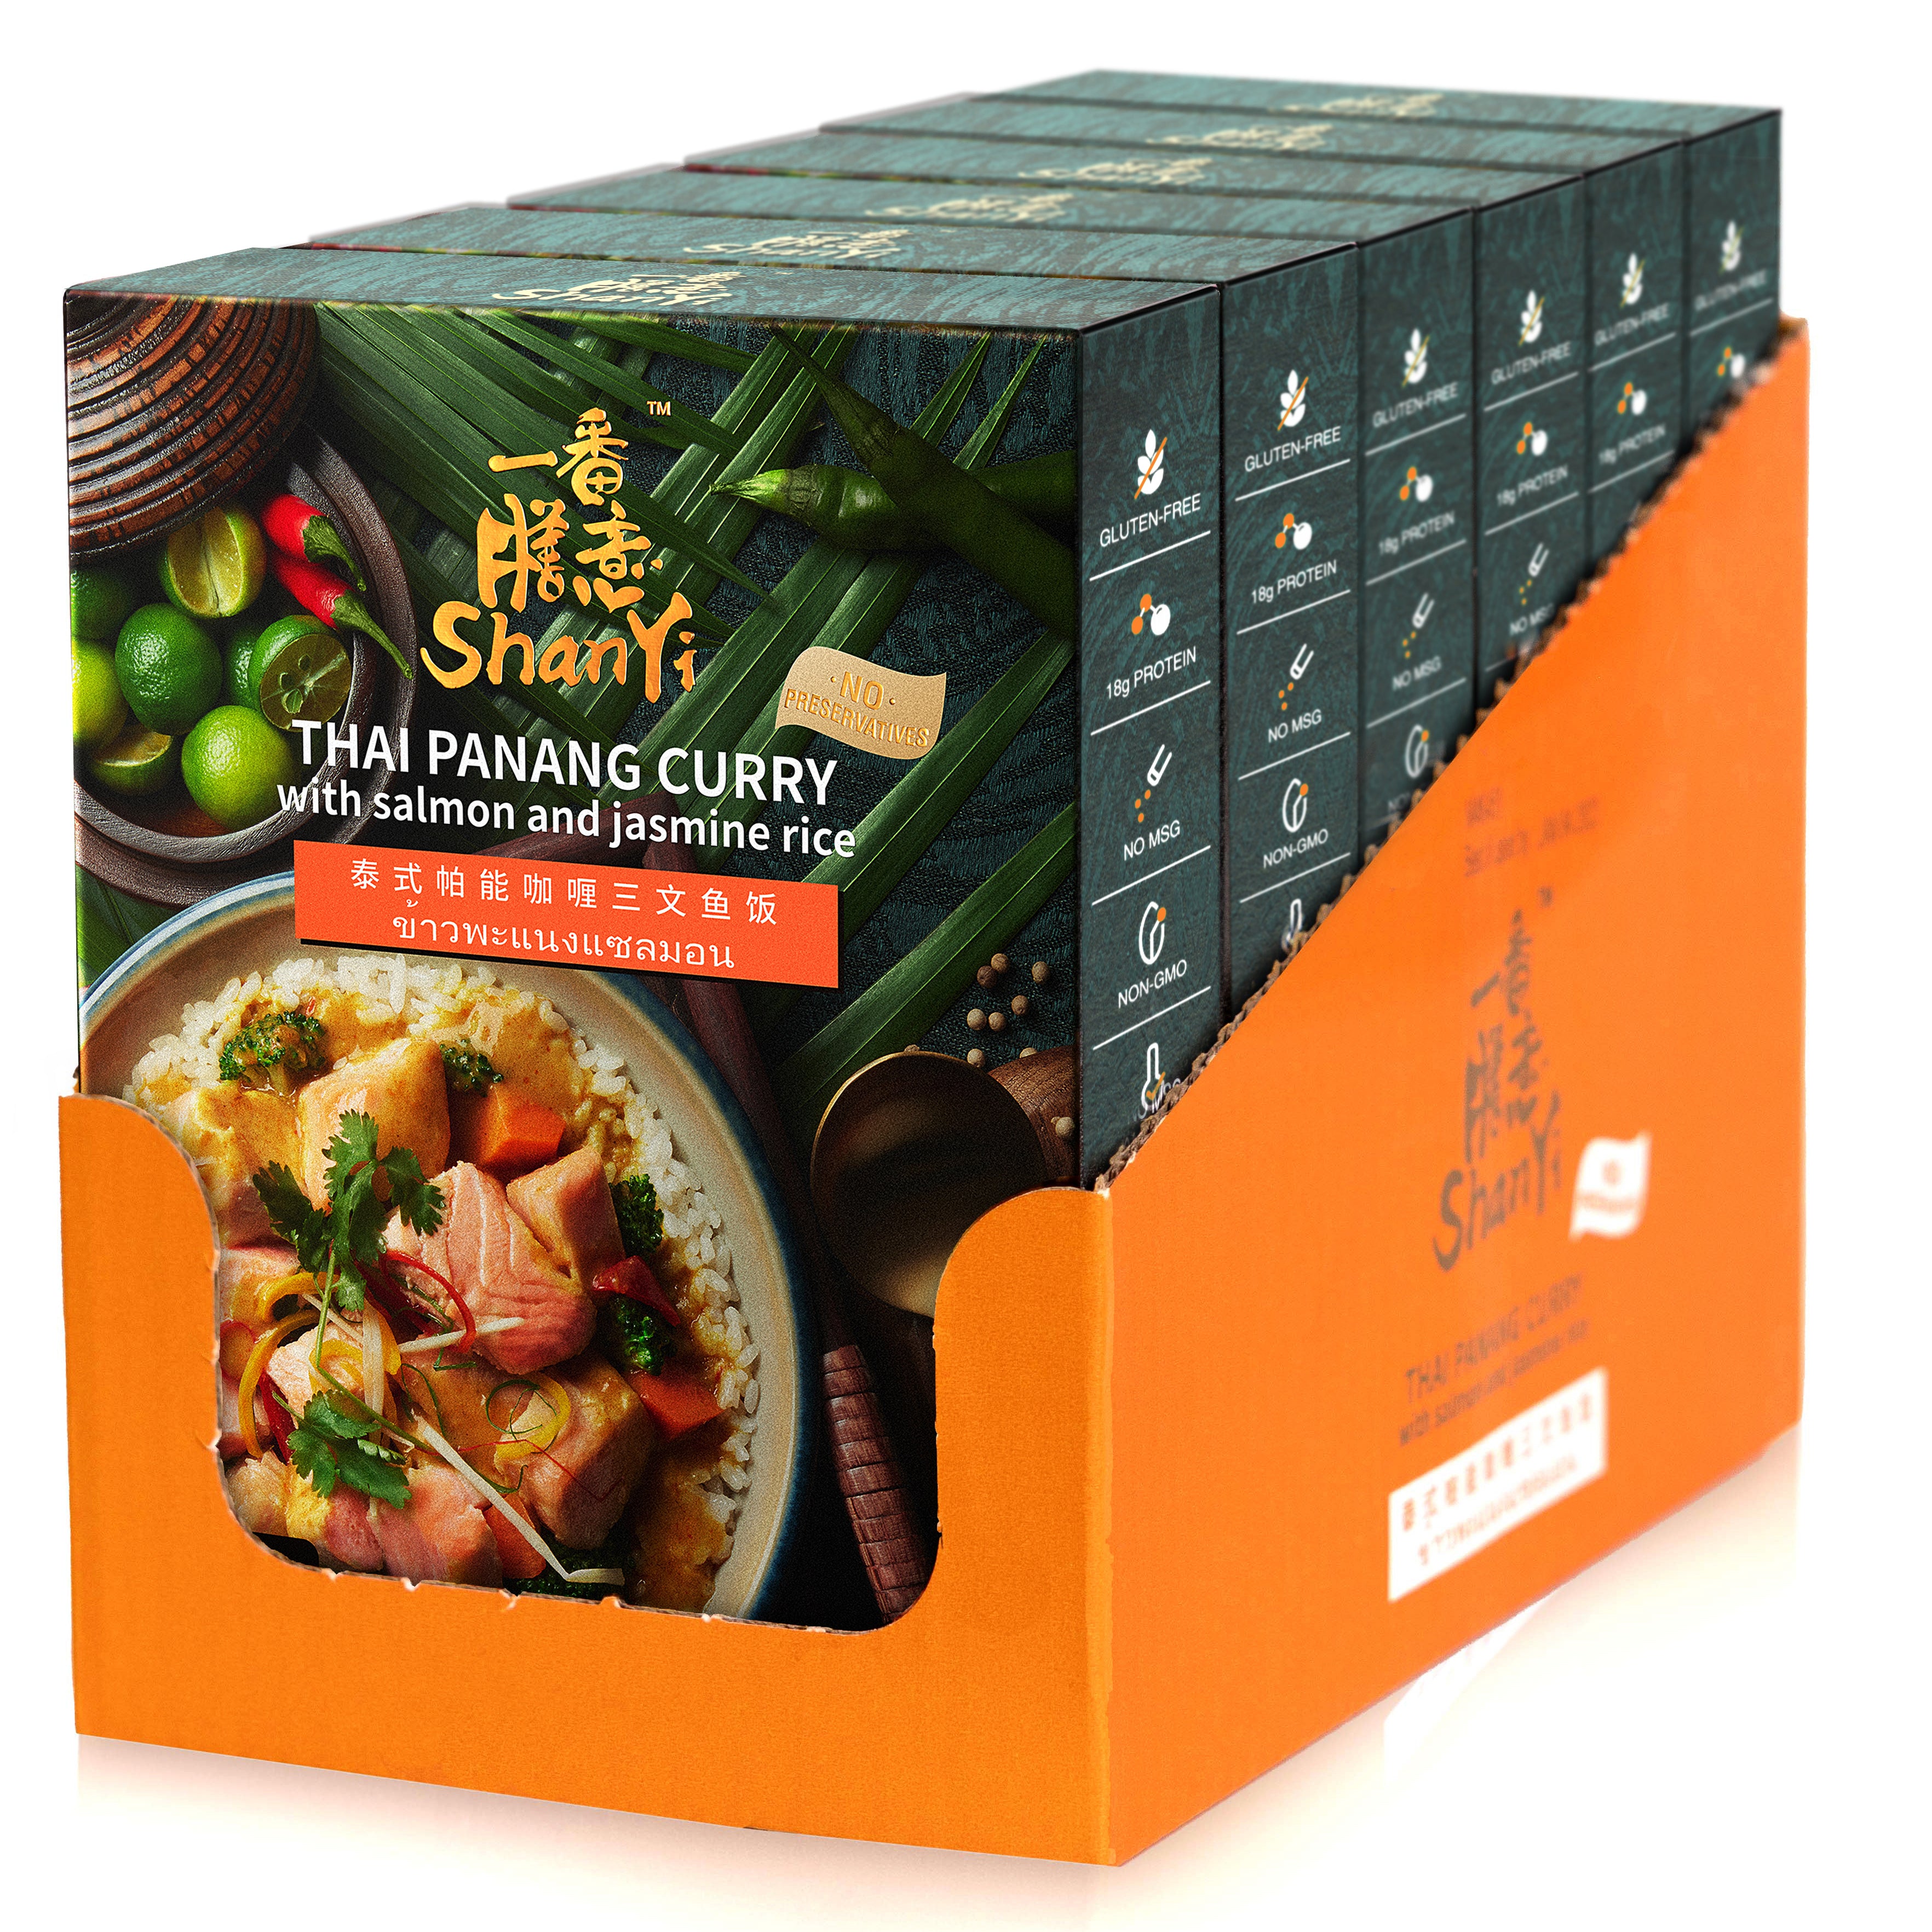 ShanYi Instant Microwave Meals Ready to Eat, 380g/13oz, Thai Panang Curry with Salmon and Jasmine Rice, Prepared Foods, Case of 6